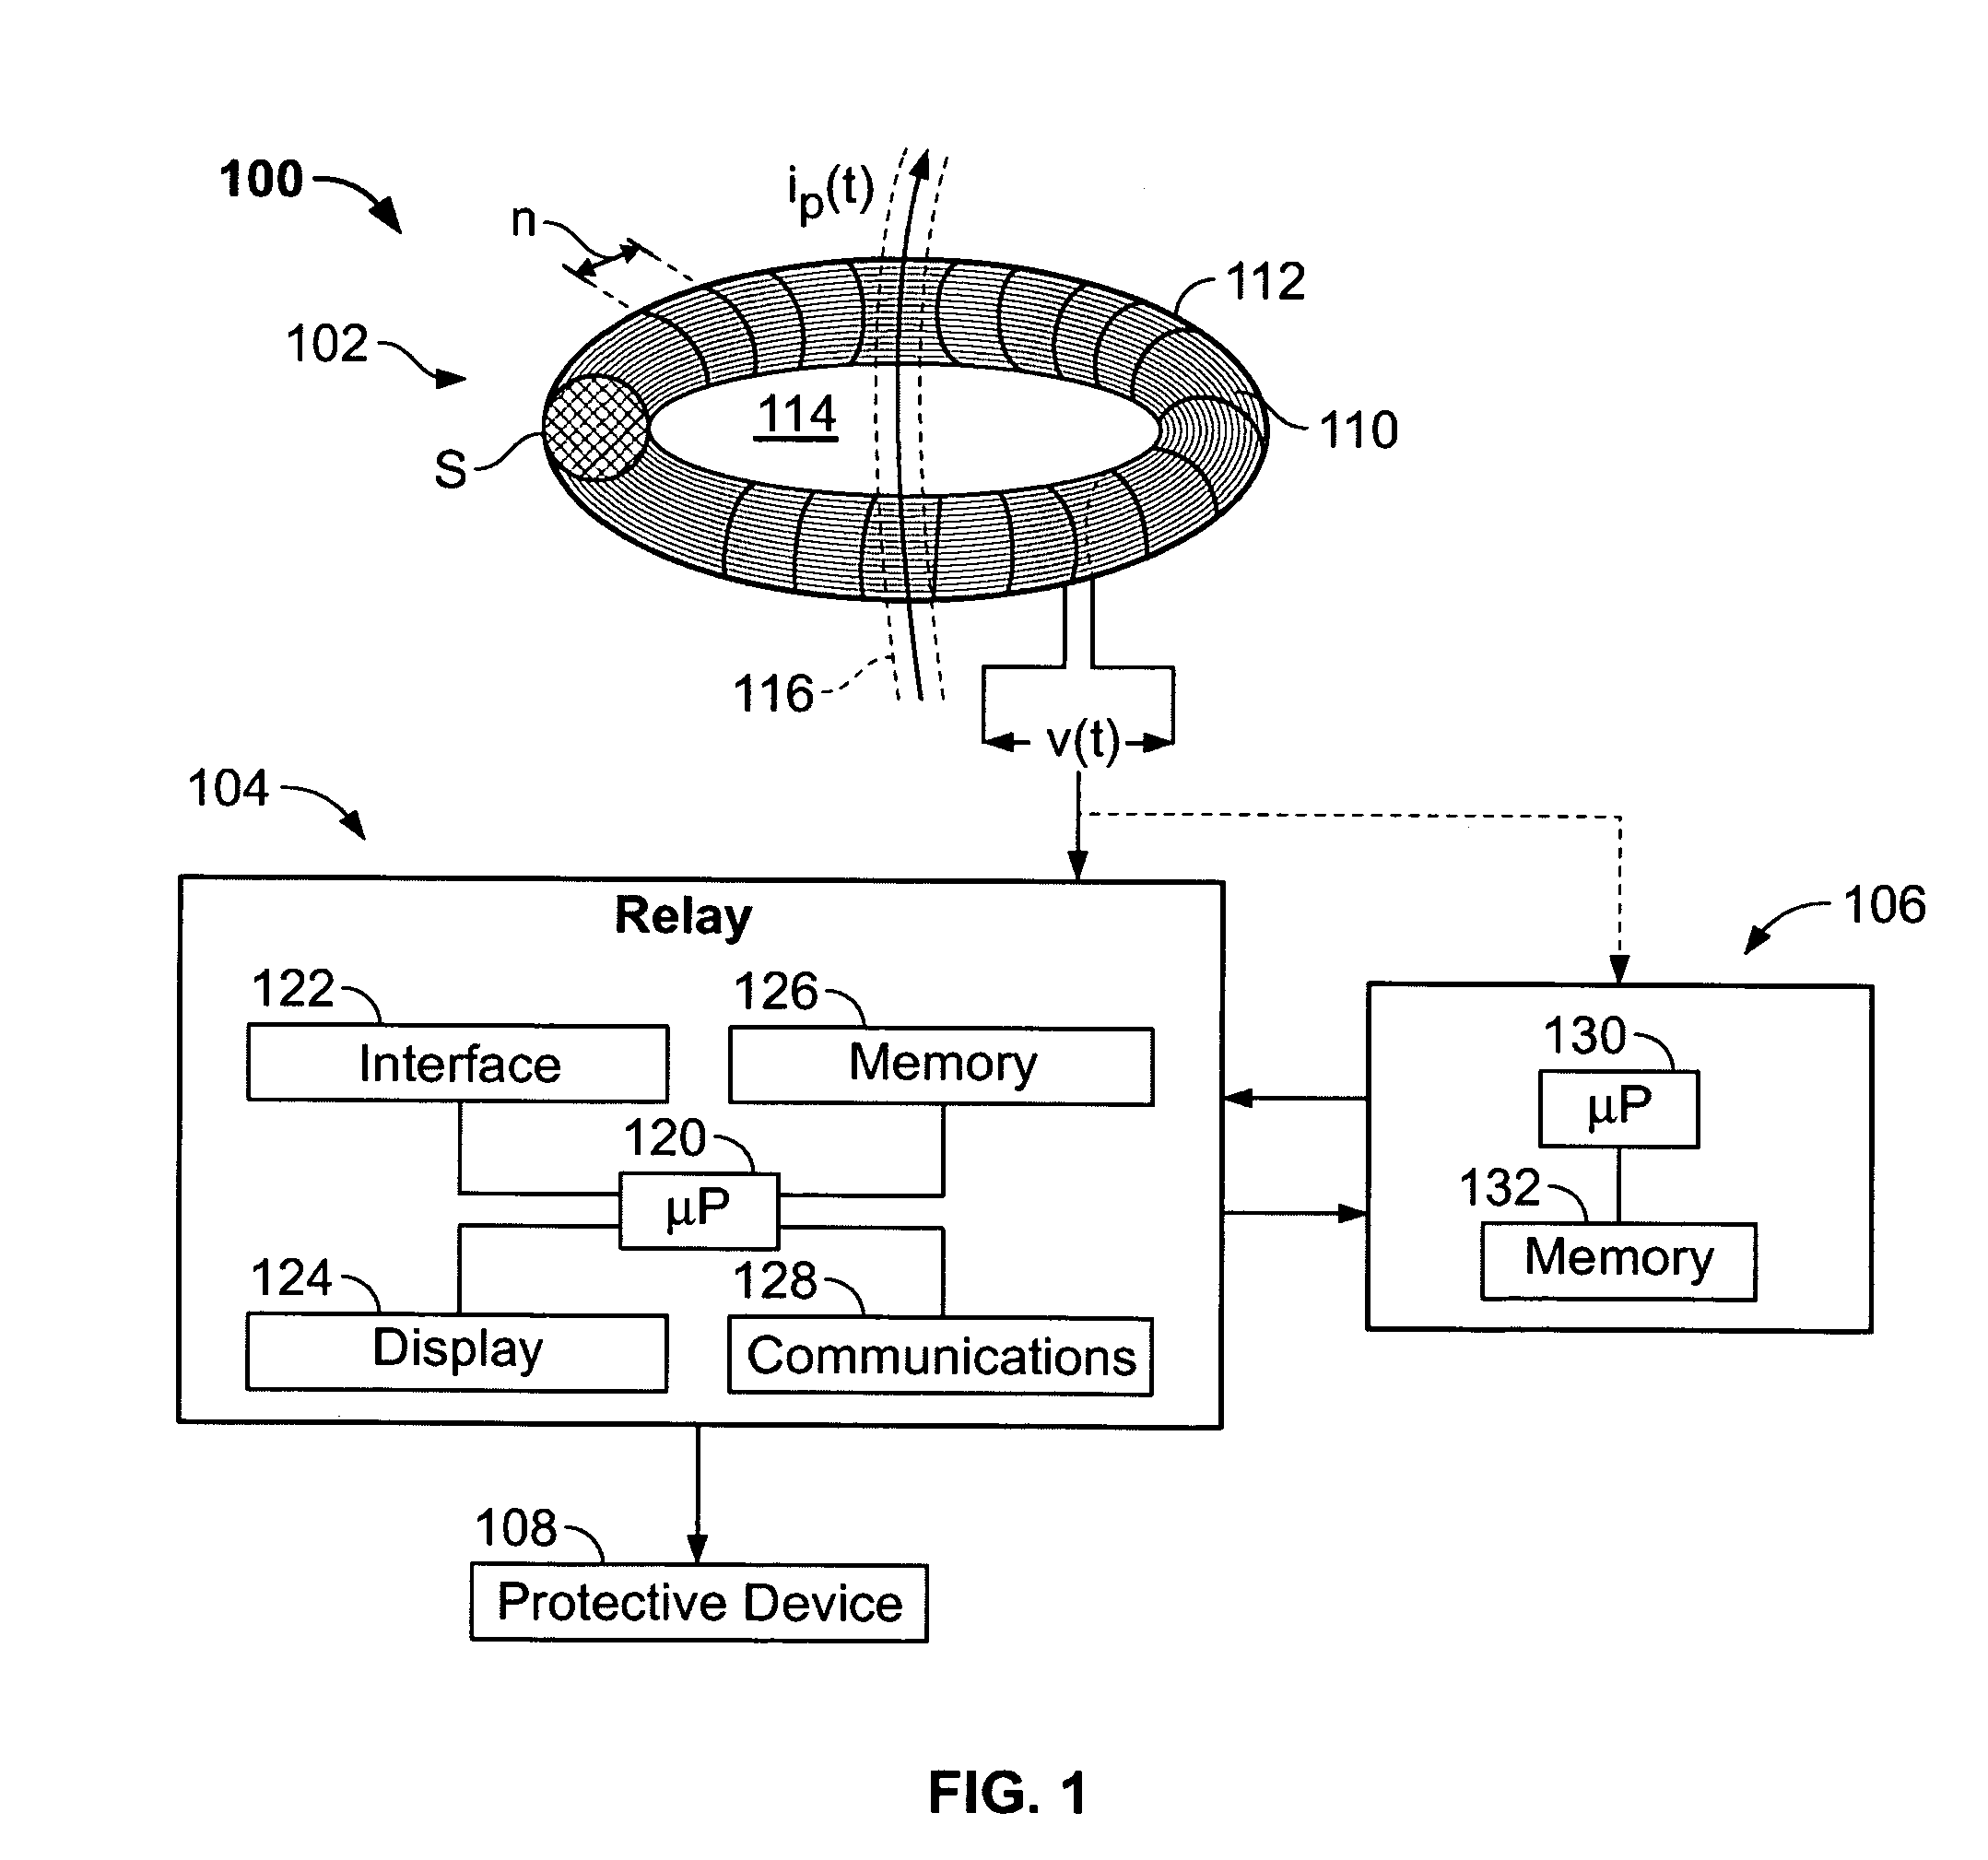 Protective relay device, system and methods for Rogowski coil sensors